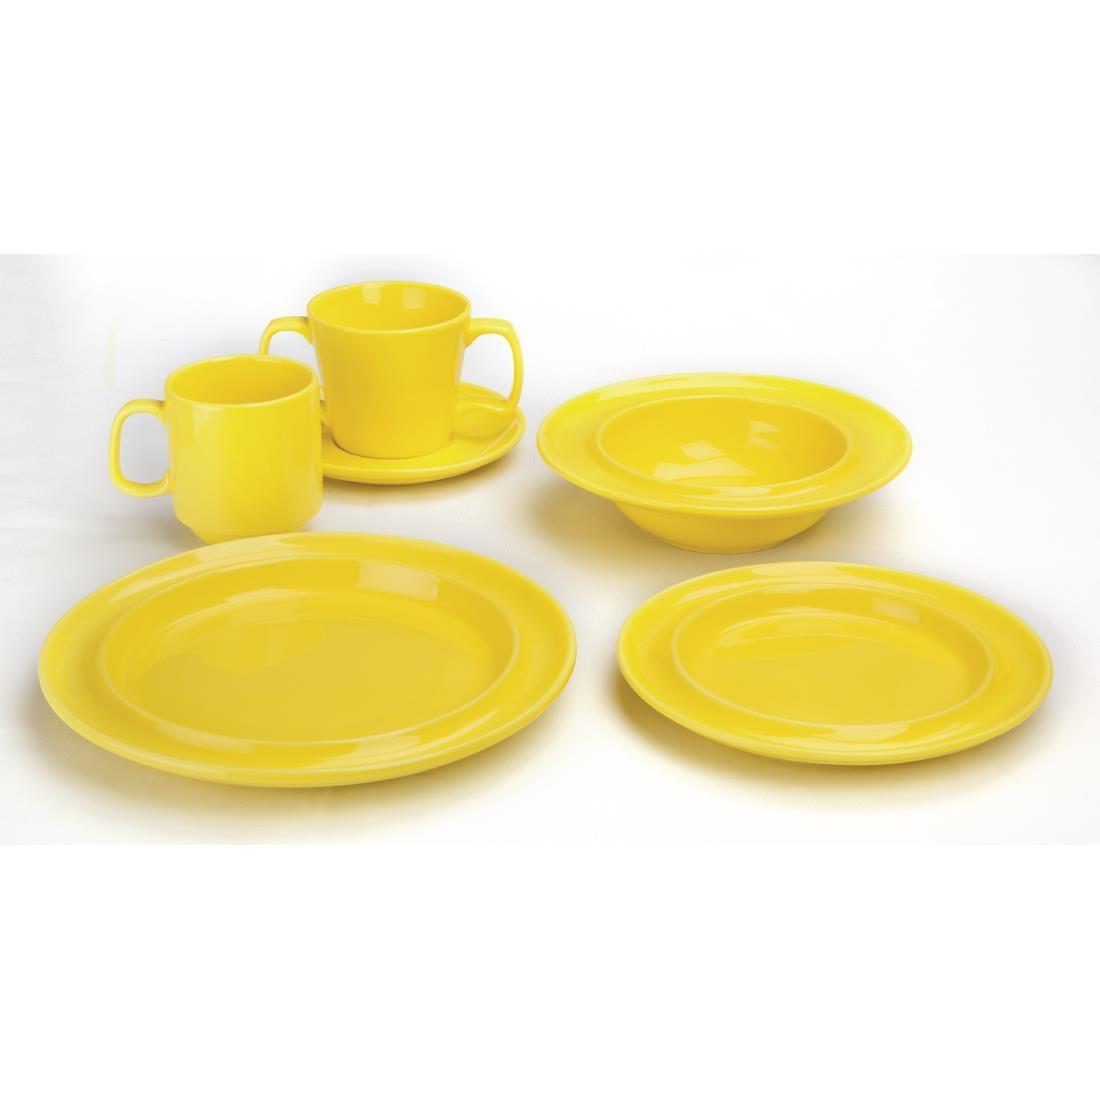 Olympia Heritage Raised Rim Bowls Yellow 205mm (Pack of 4) - DW148  - 5